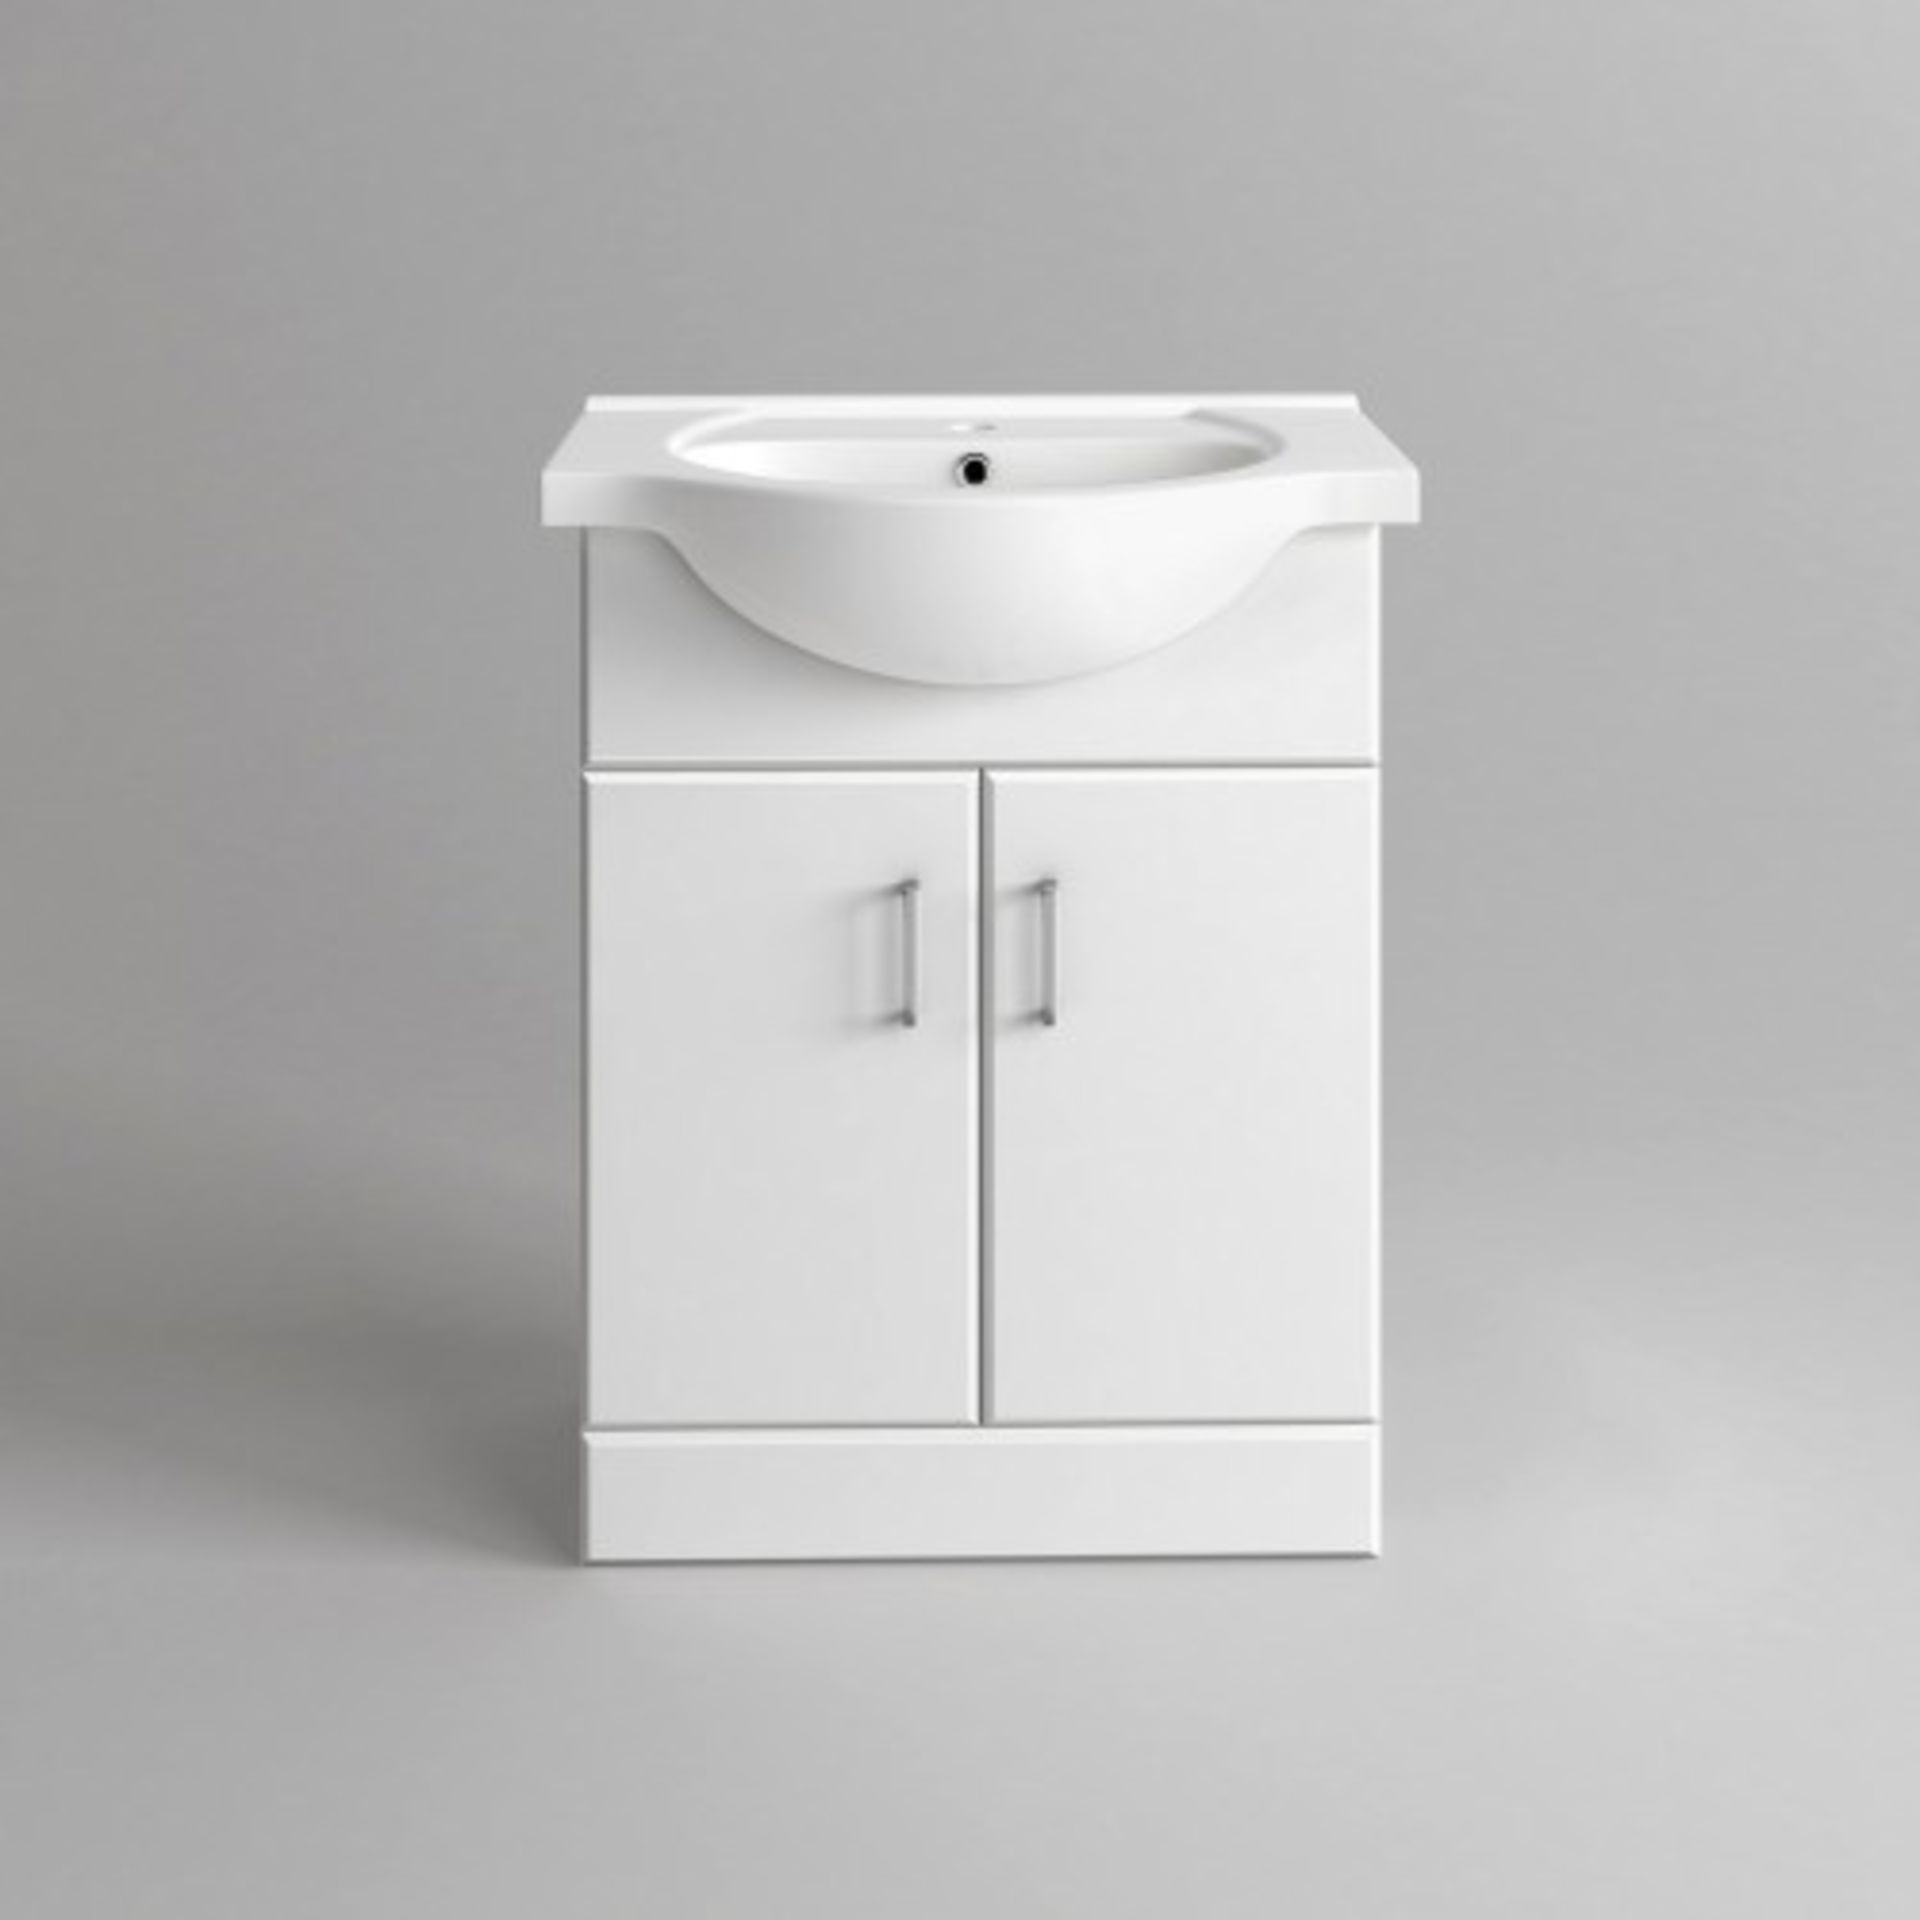 (J27) 550X300MM QUARTZ GLOSS WHITE BUILT IN BASIN CABINET. RRP £349.99. Comes complete with ba... - Image 3 of 3